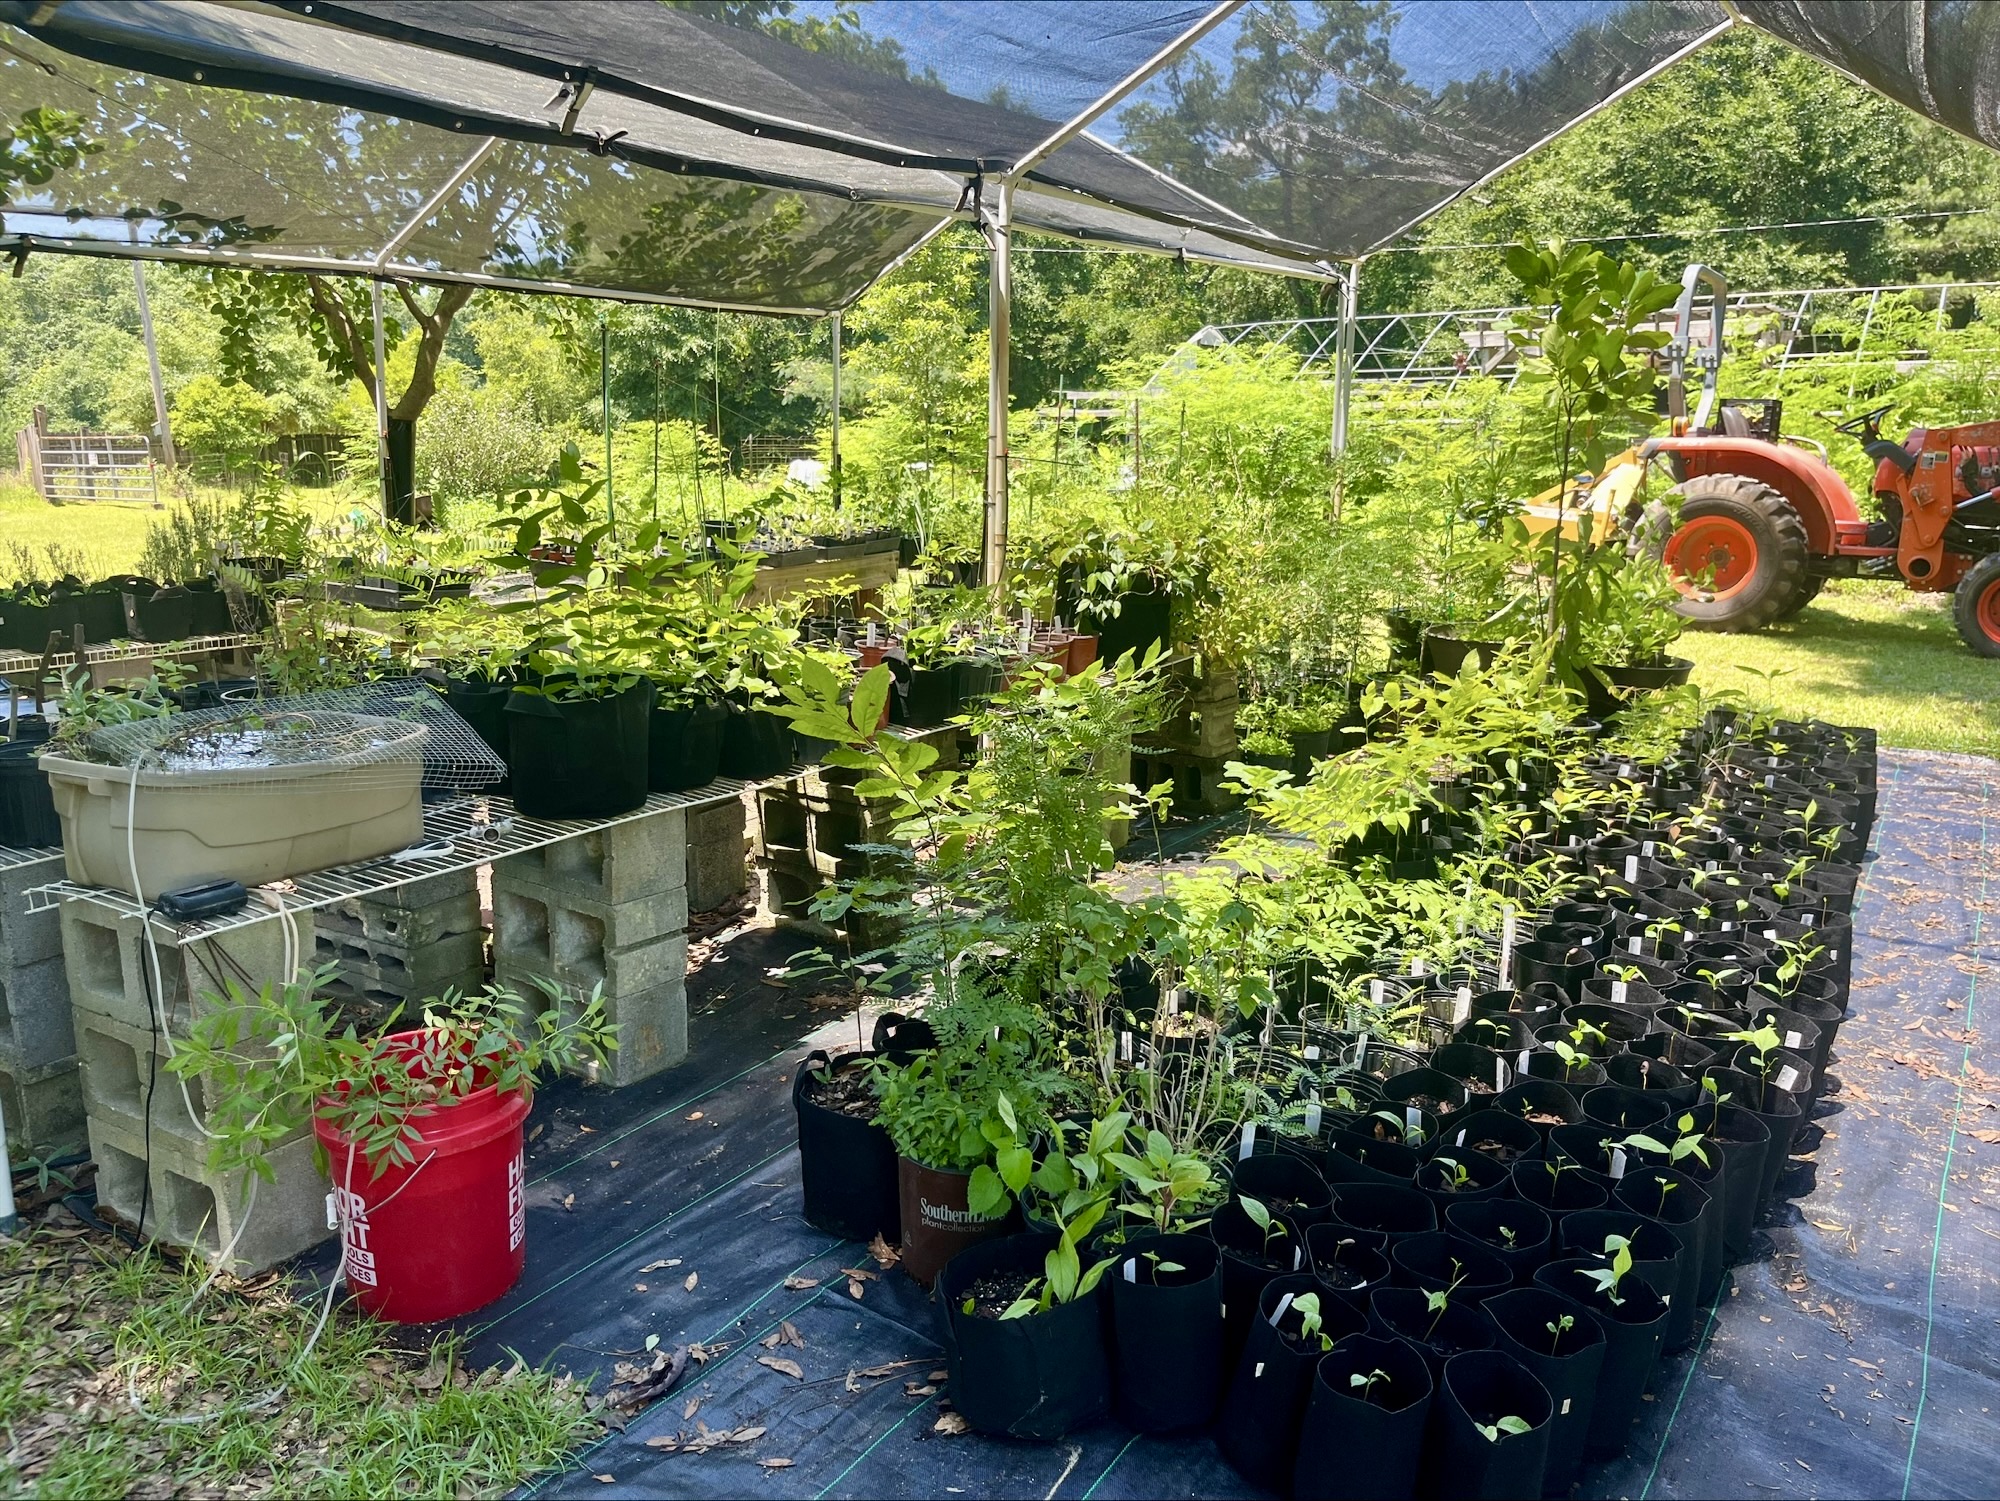 The Lolleys use “non-intervention” methods to grow a variety of medicinal plants at Mayim Farm.